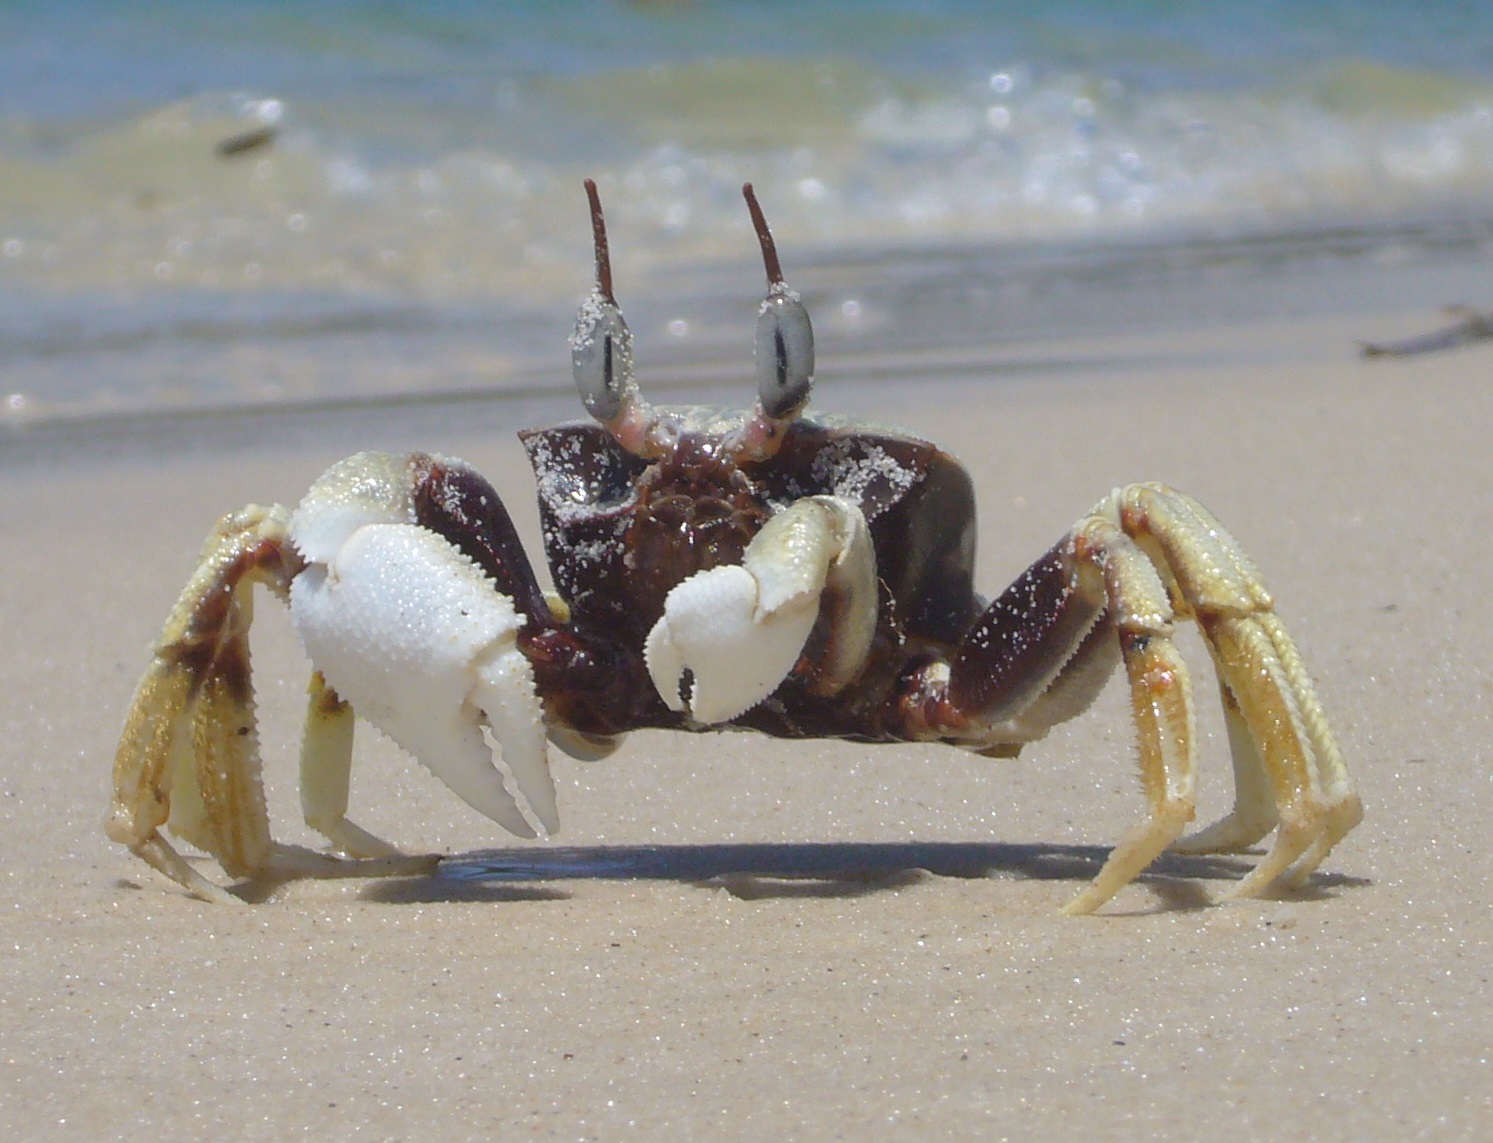 an image of a crab with its shell slightly open